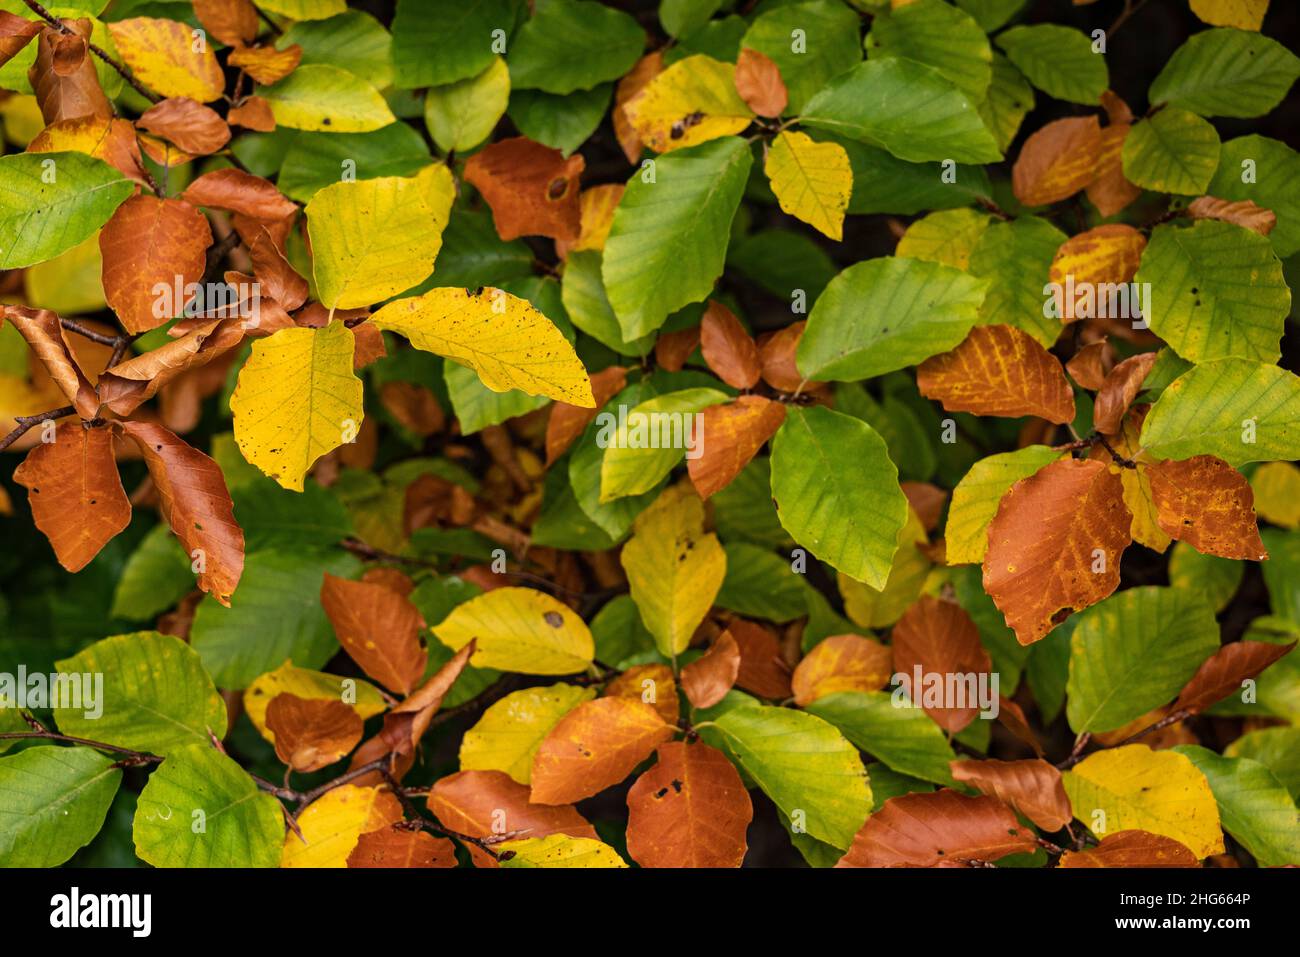 Full frame shot of contrasting multicolored beech leaves (green, yellow and brown), growing on the same tree, showing the beginning of autumn Stock Photo